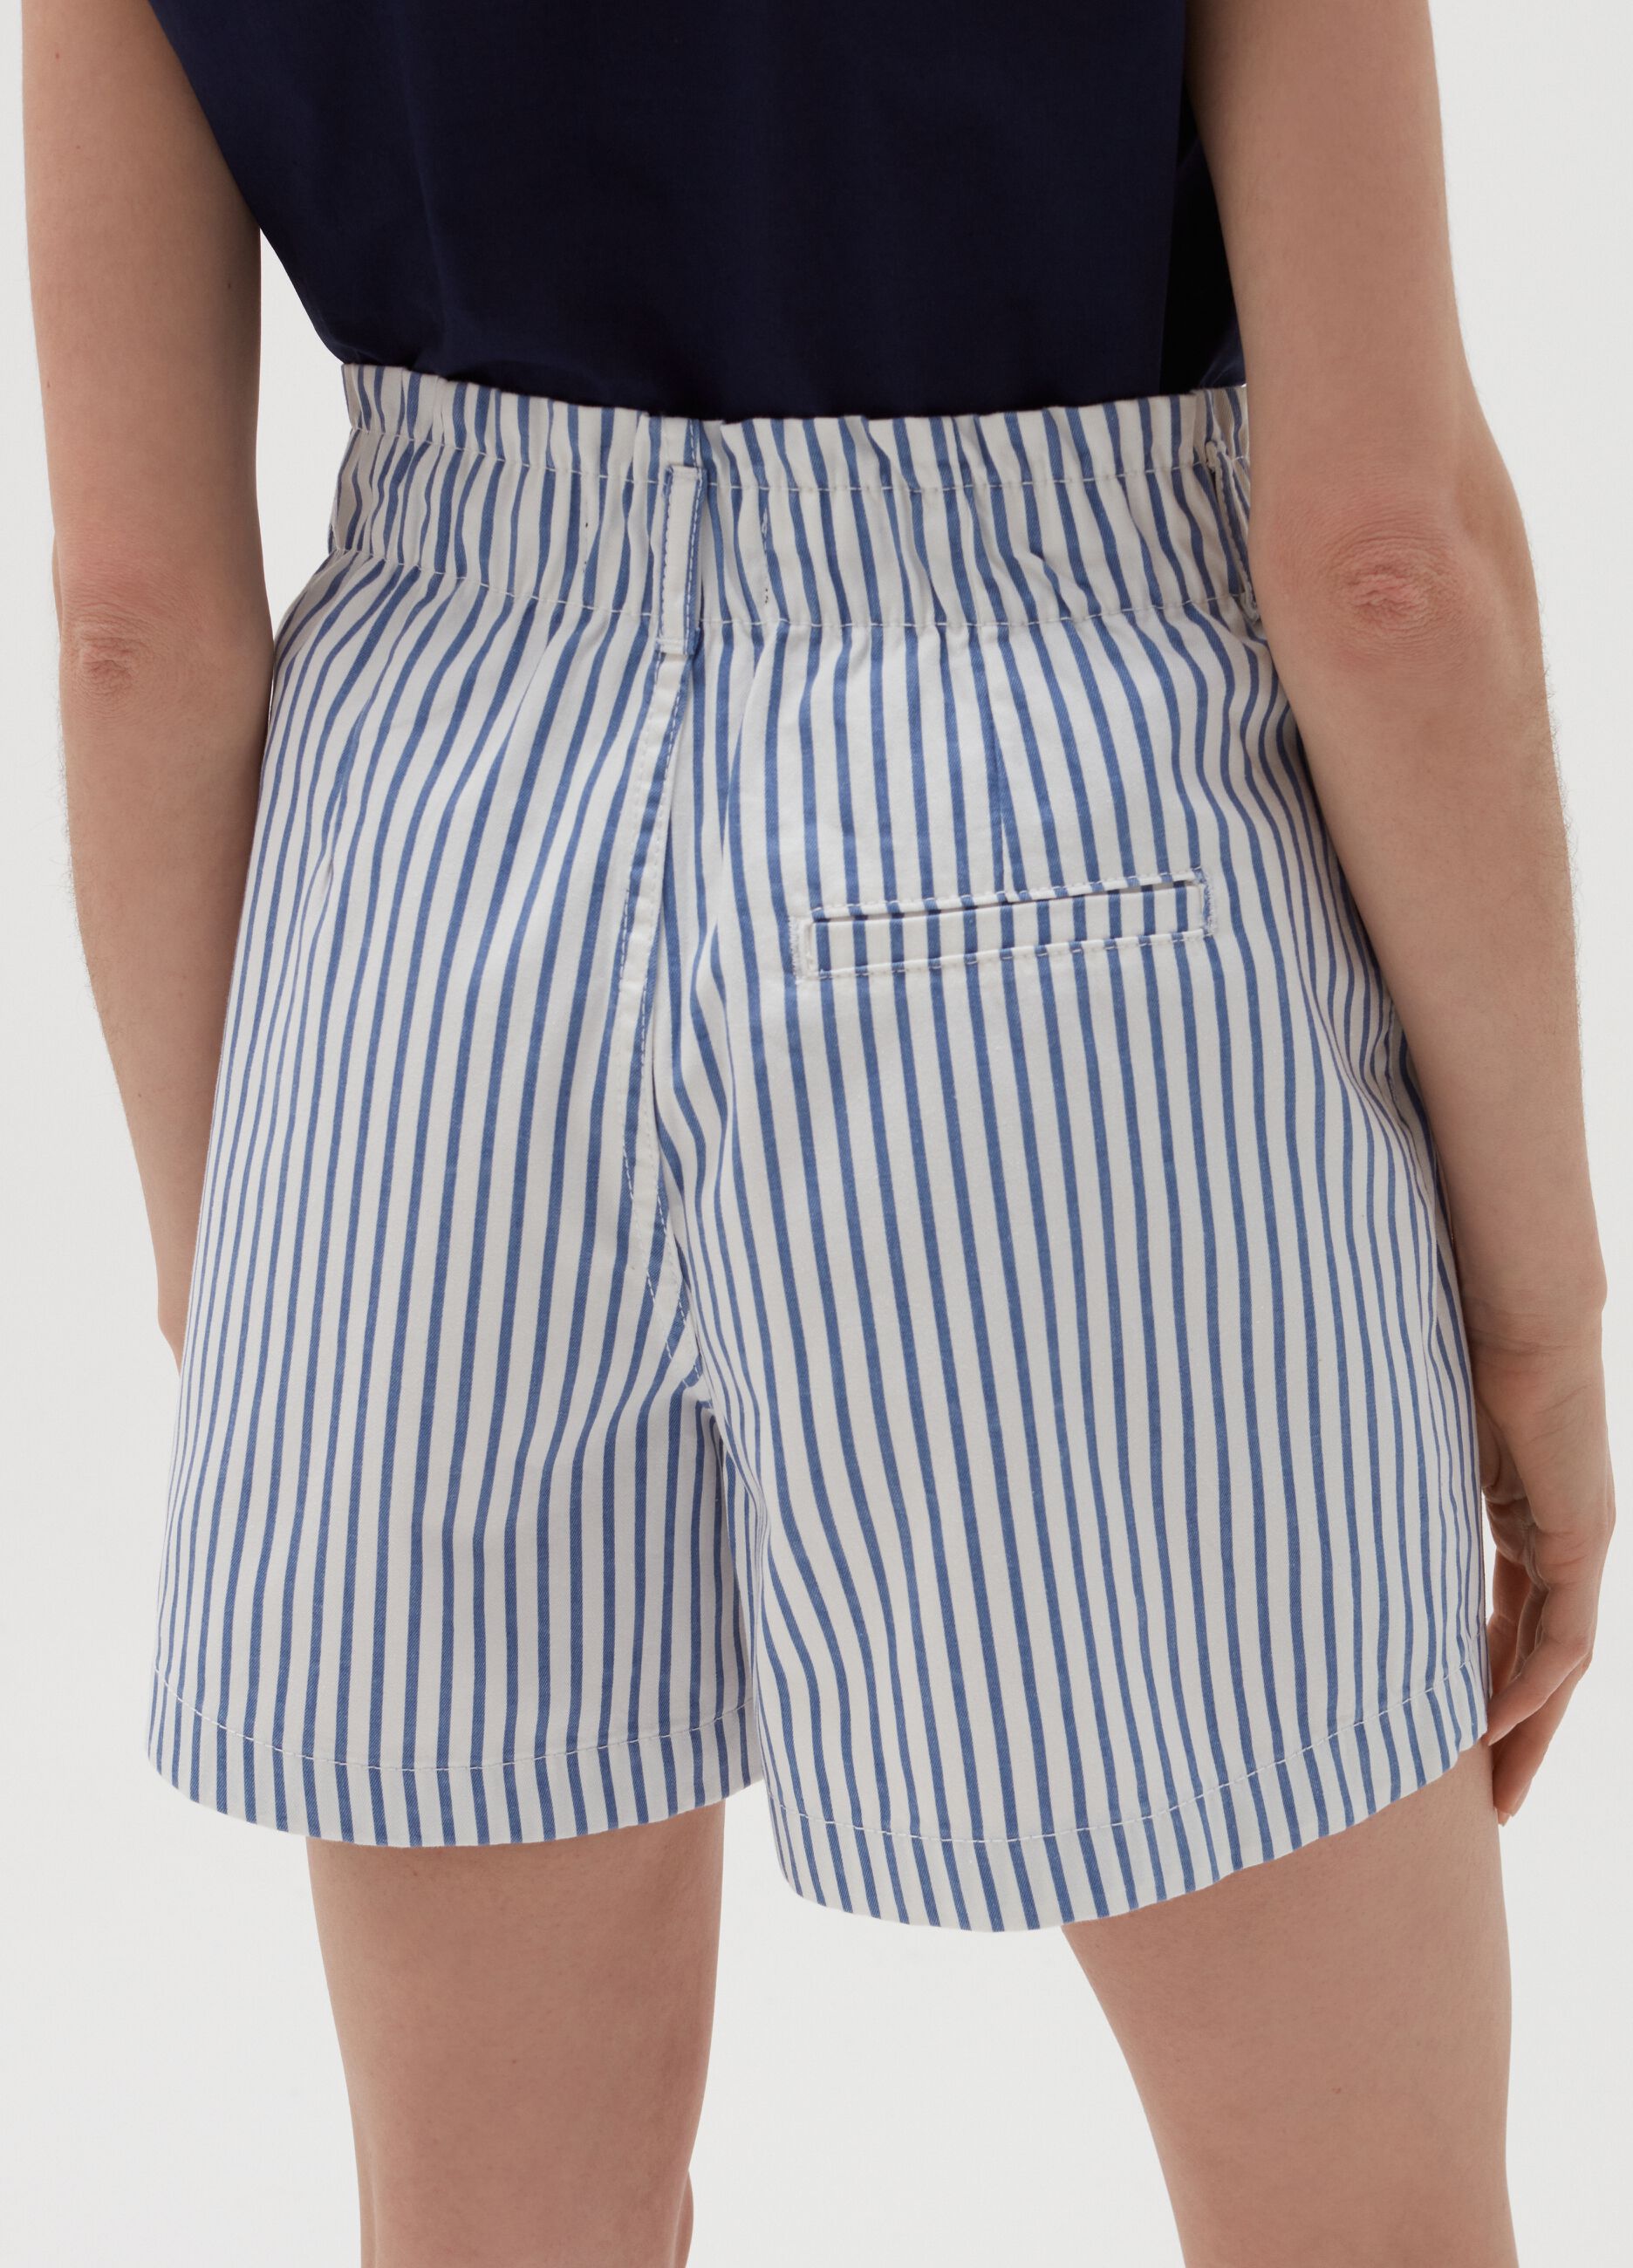 Cotton shorts with high waist